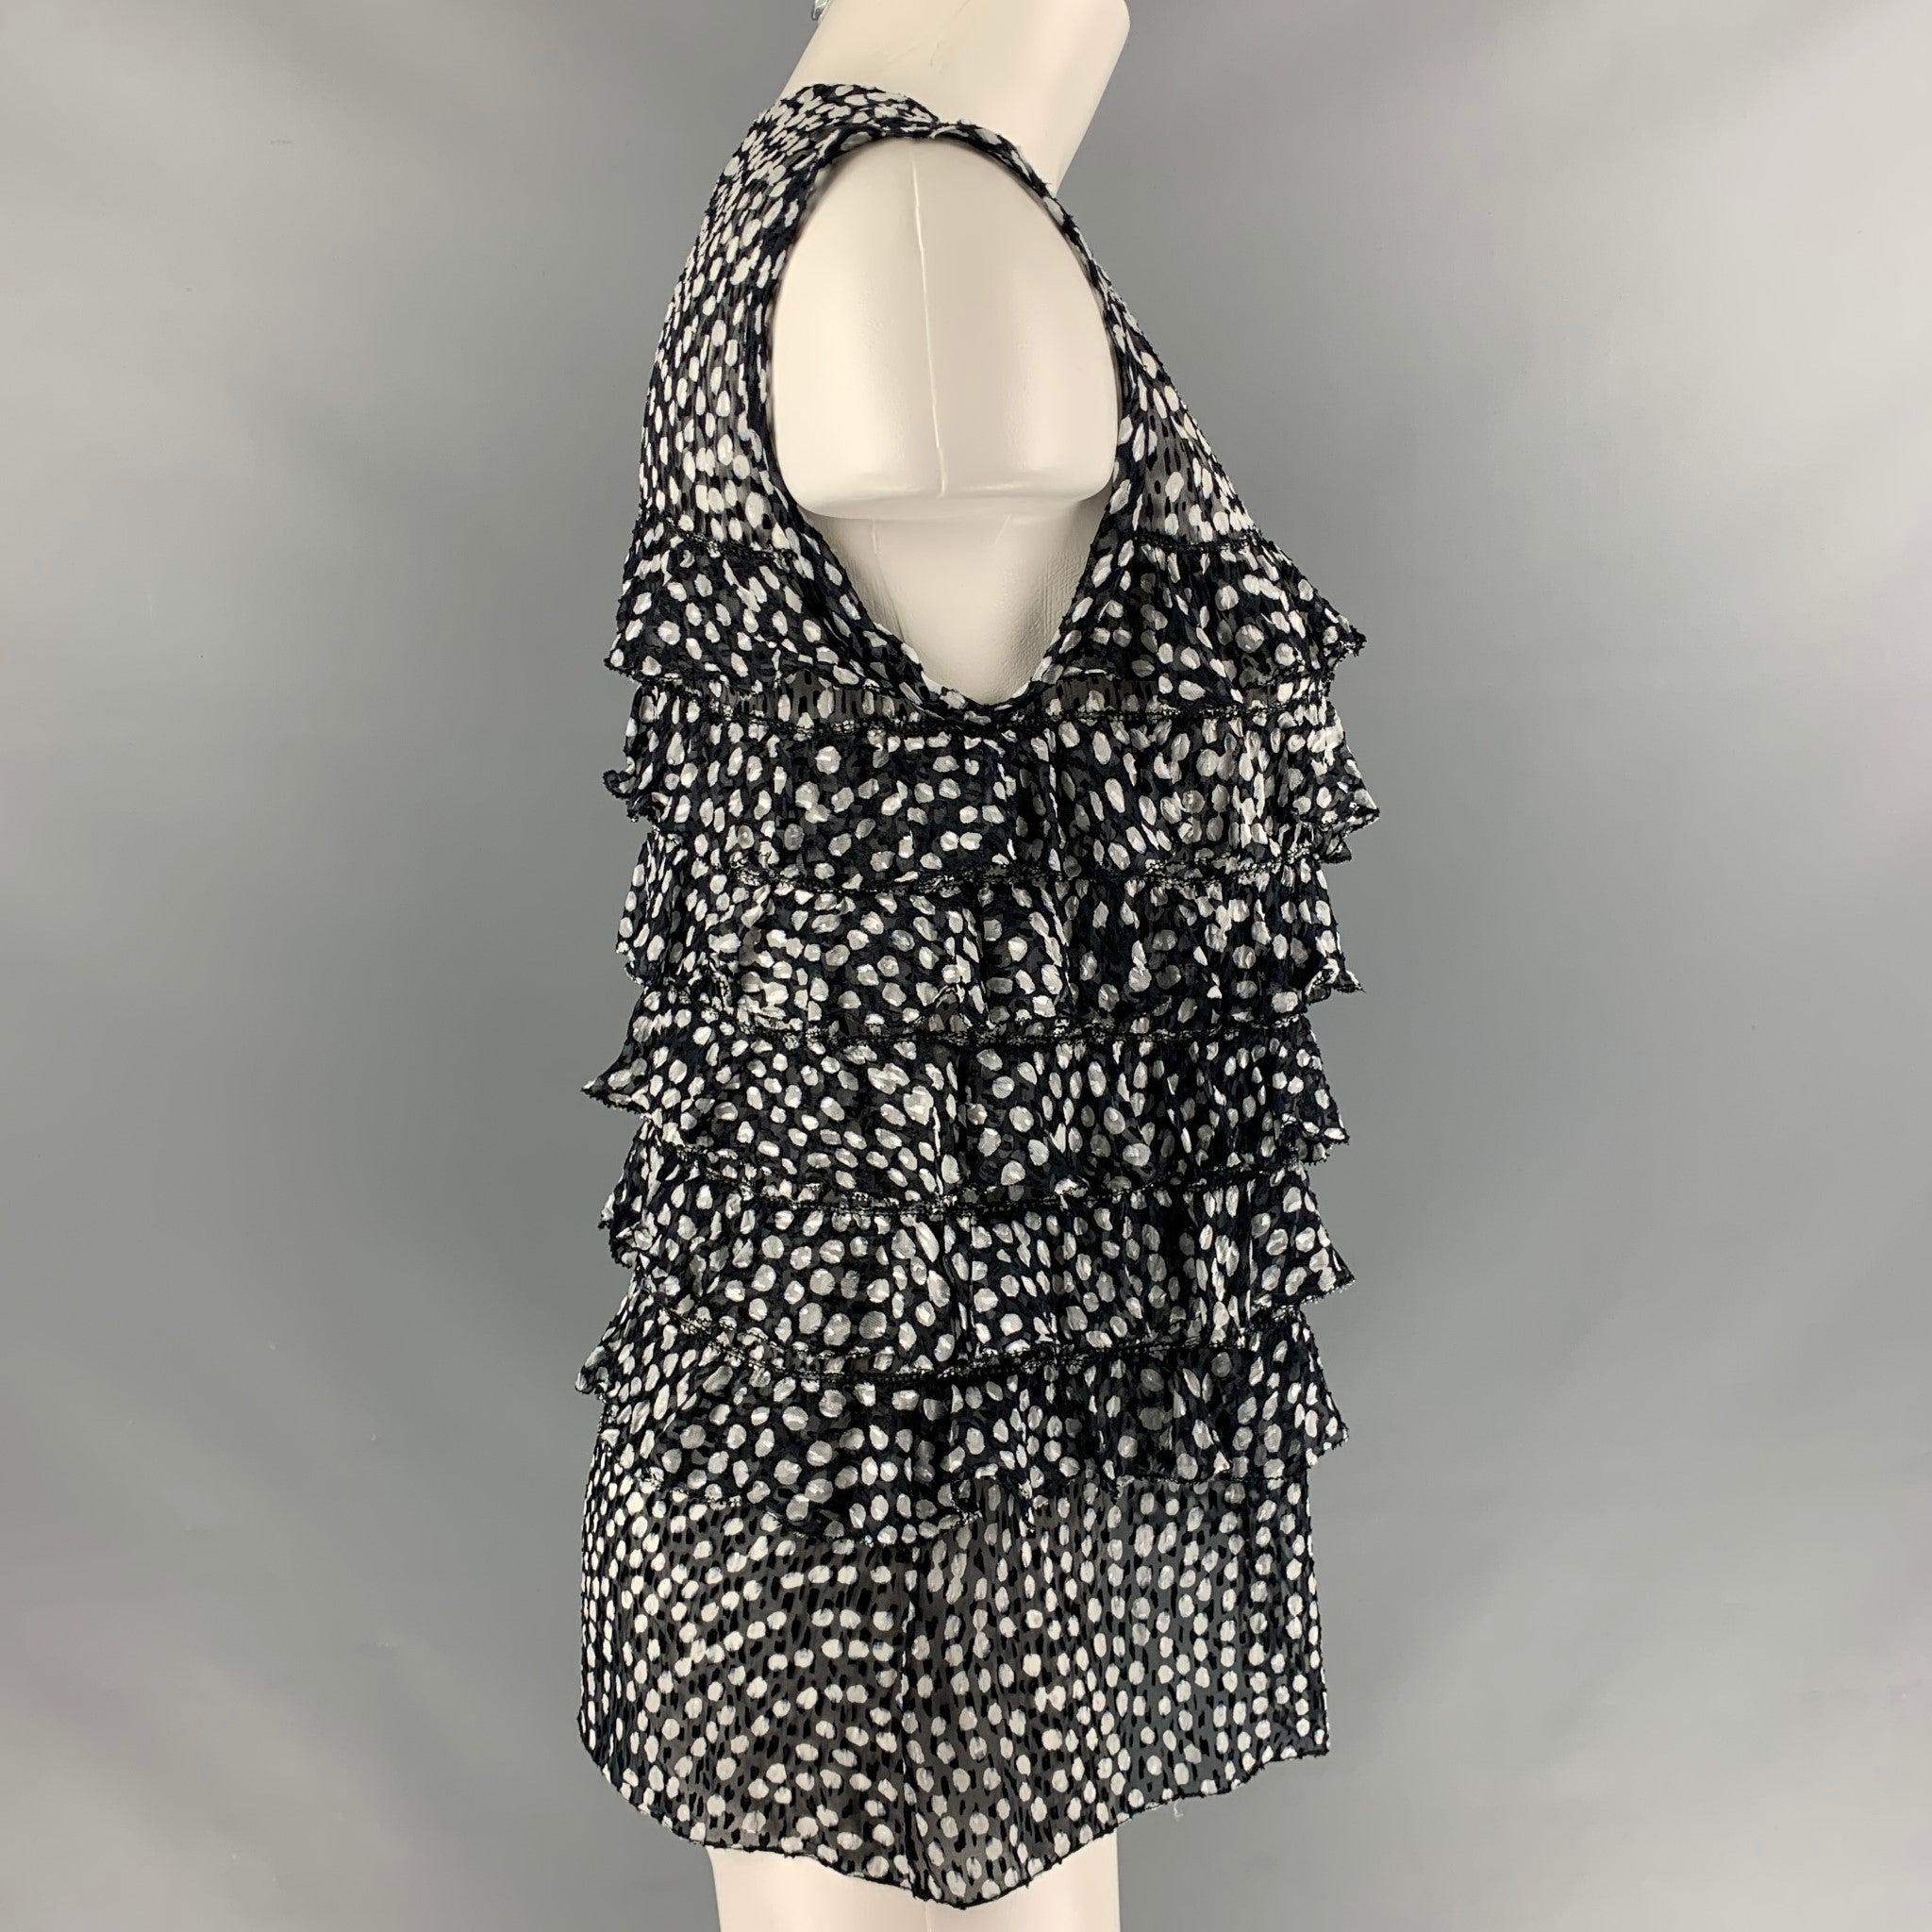 JASON WU sleeveless blouse comes in black and white dots print silk chiffon fabric featuring ruffles detail and button up closure. Made in USA.Excellent Pre-Owned Condition. 

Marked:   6 

Measurements: 
 
Shoulder: 13 inches Bust: 36 inches